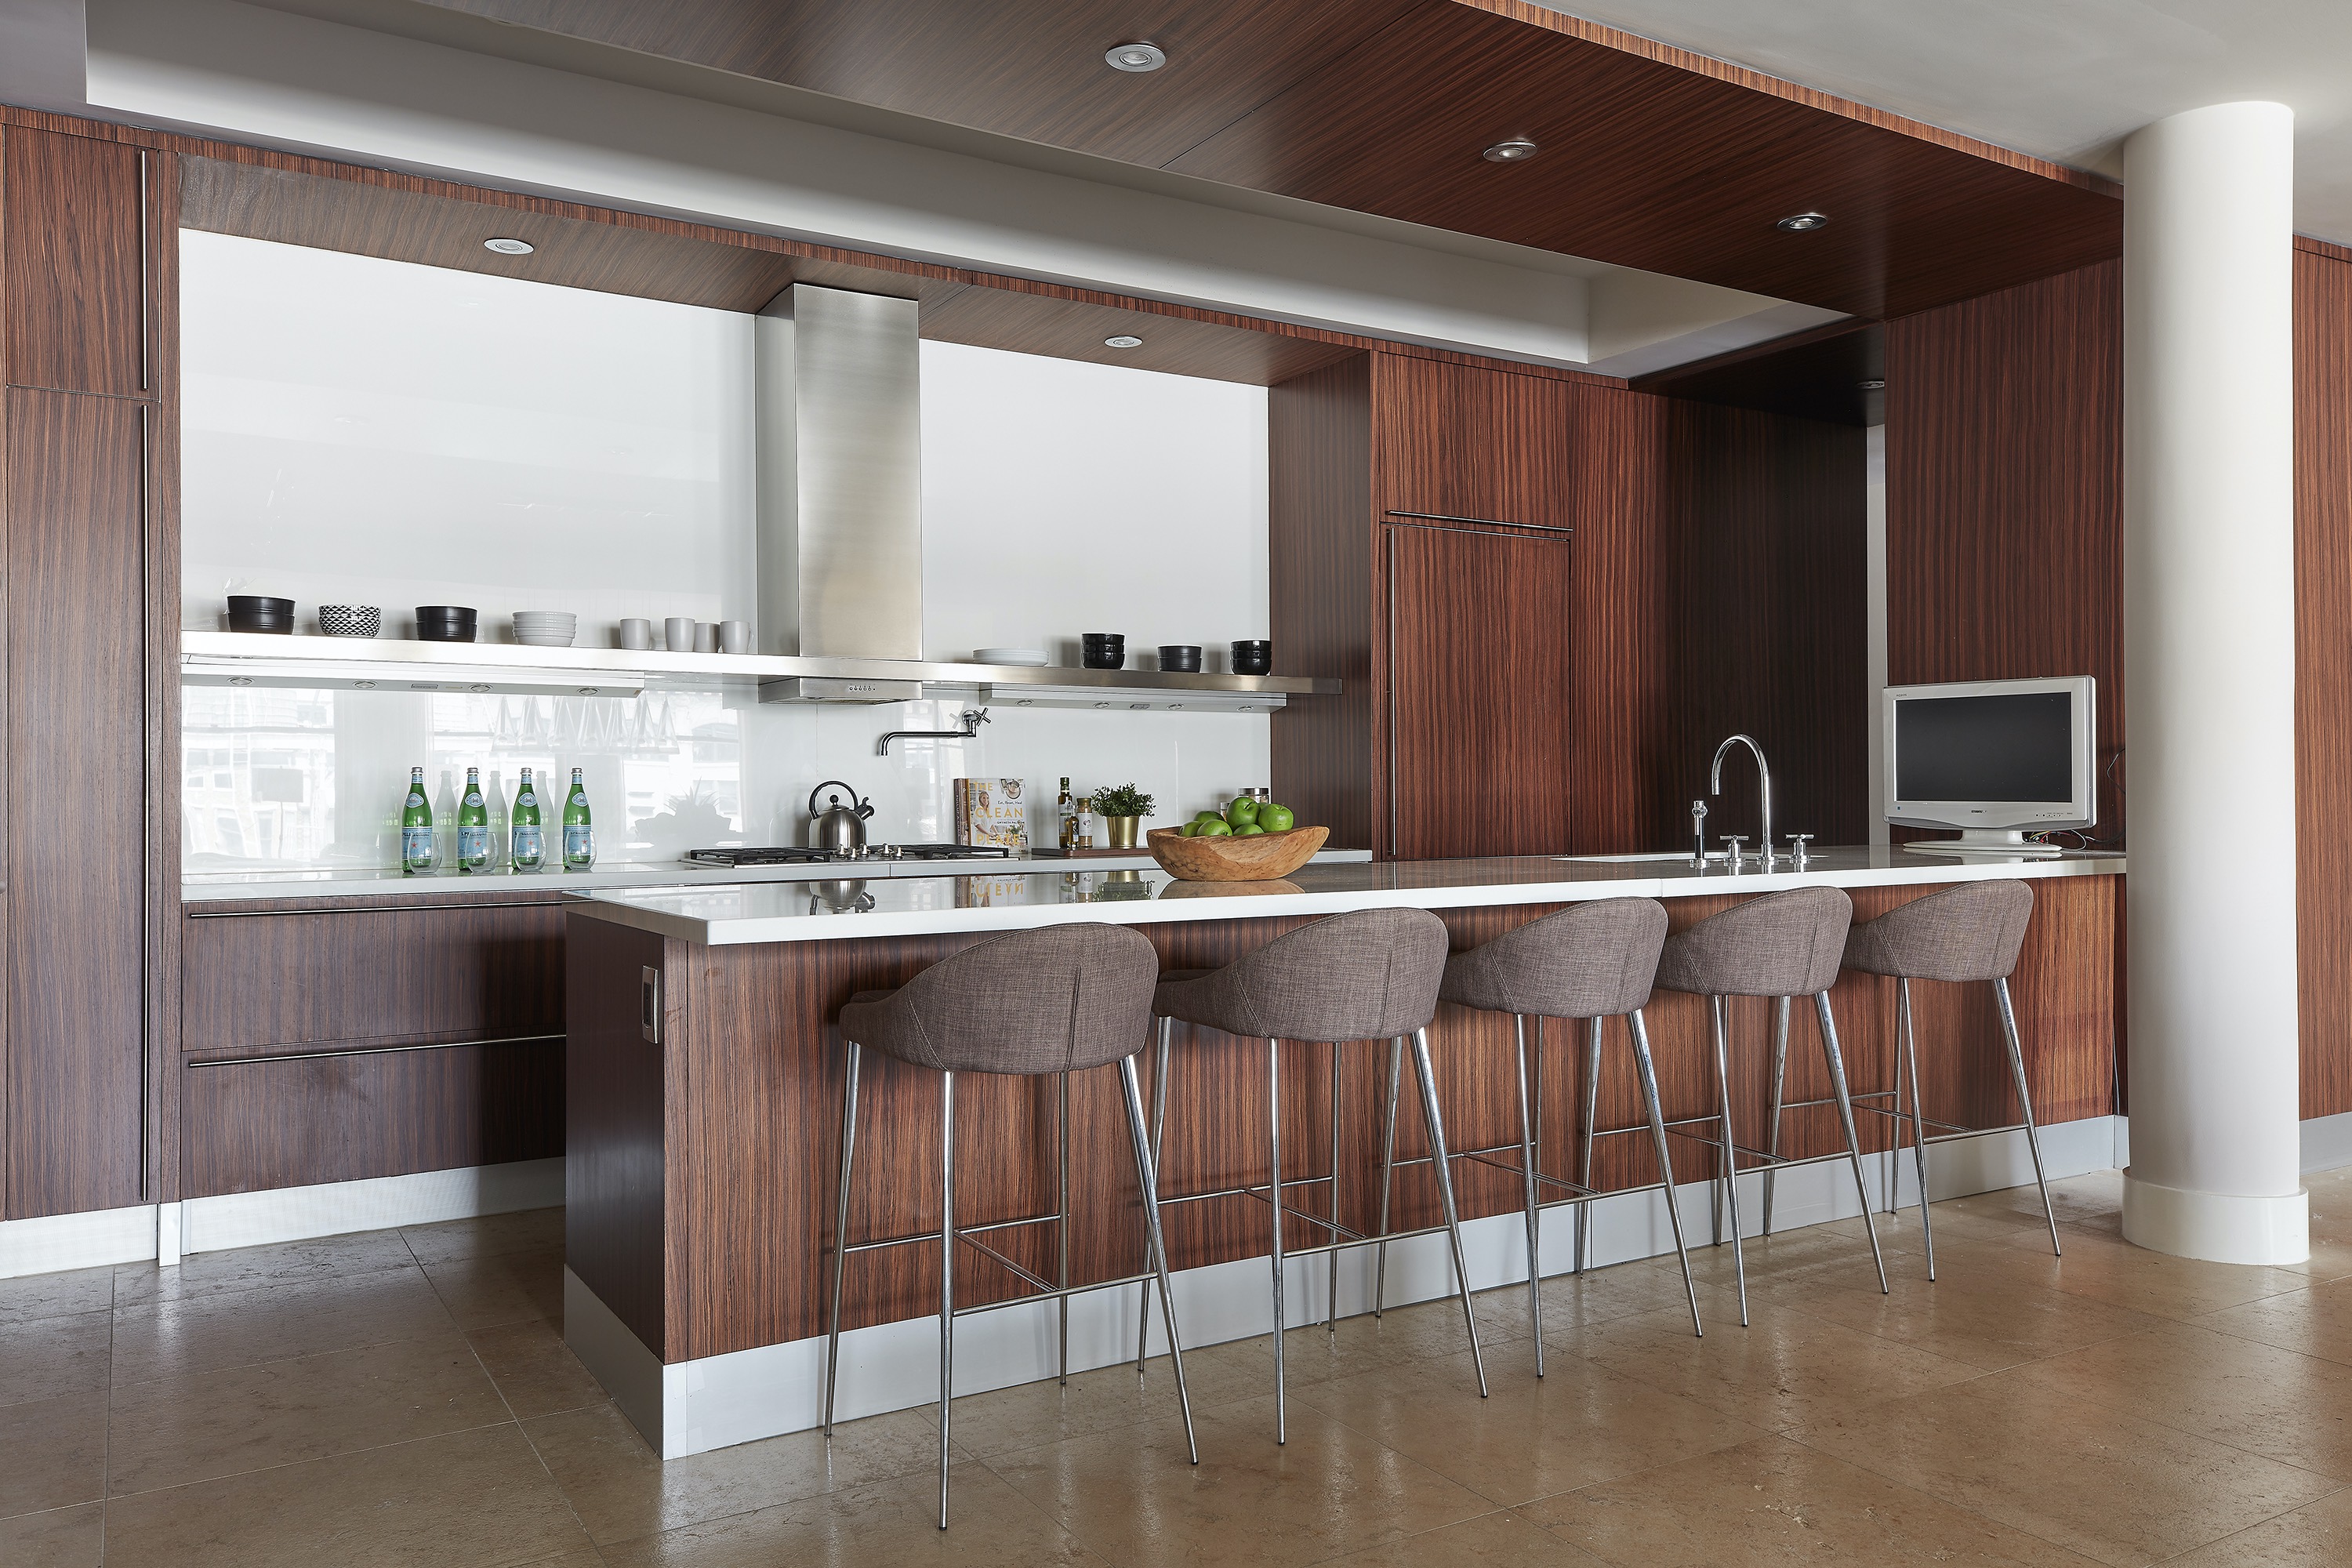 Shelves serve as an alternative to cabinetry in this modern kitchen.